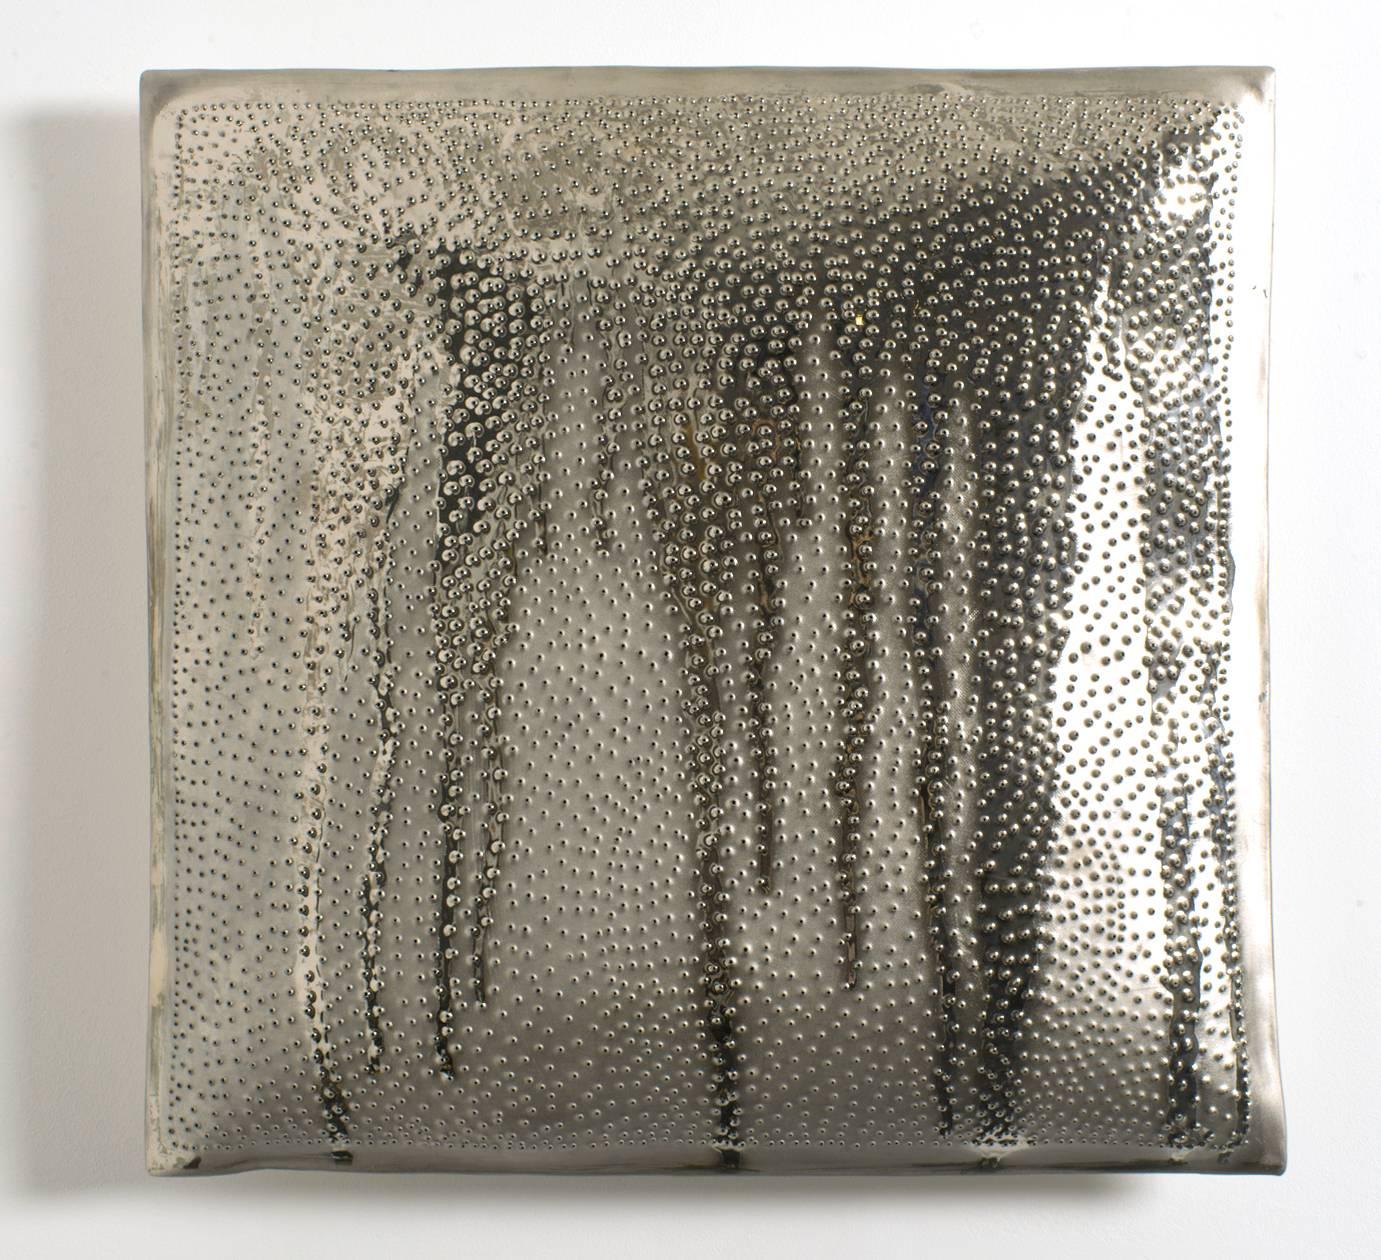 Stepanka Horalkova Abstract Sculpture - Silver porcelain pillow with drips of silver glaze, Color Study